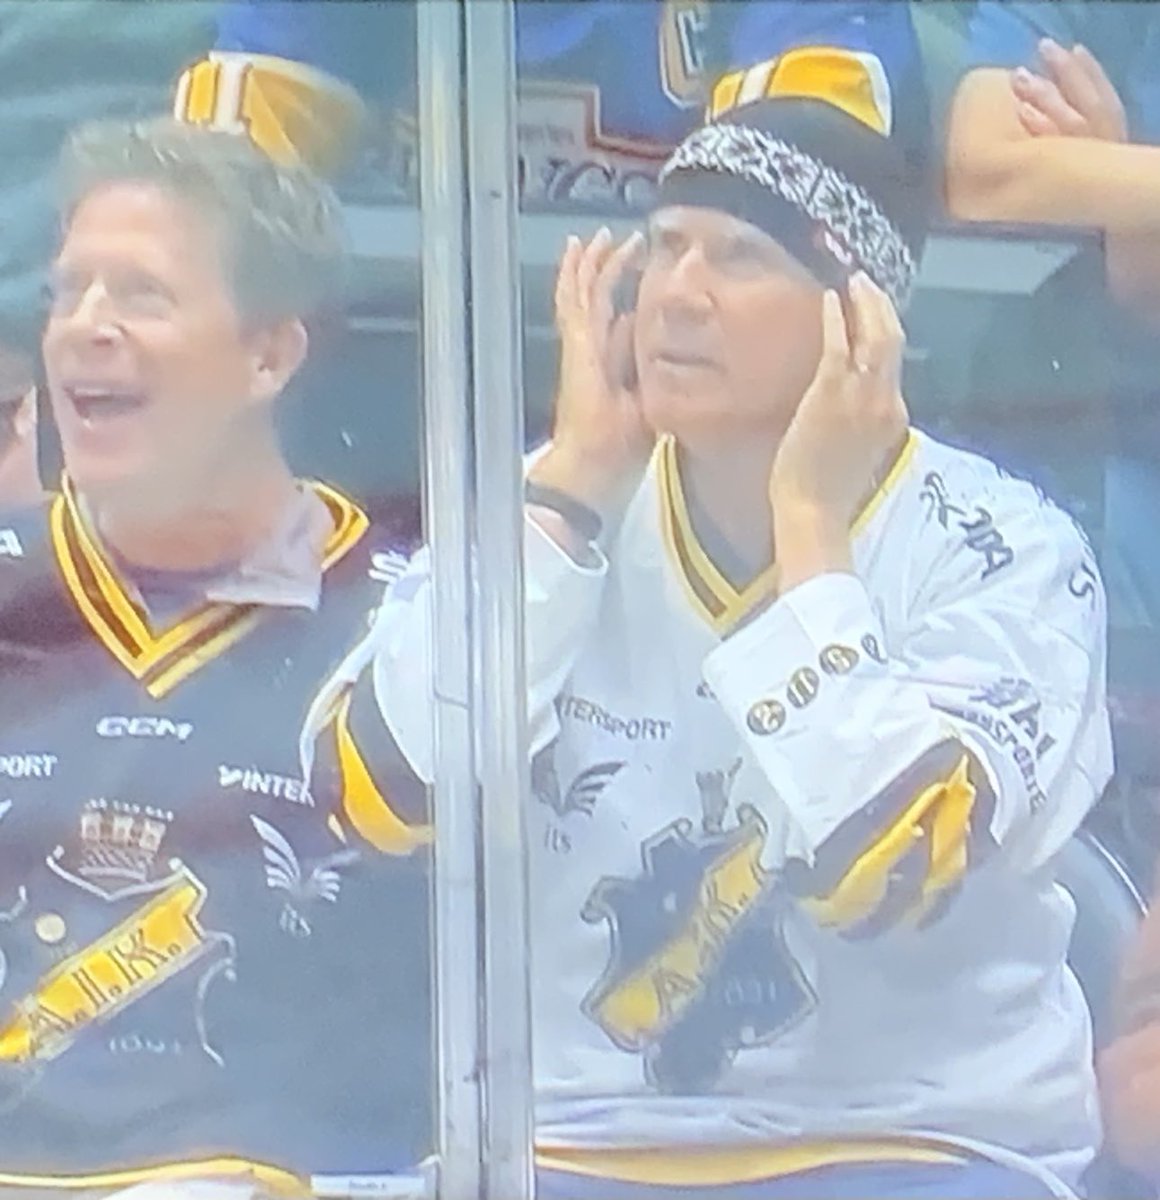 Will Ferrell at the Oilers v Kings game…sporting an #AIK Sweater from the Swedish Elite League. #StanleyCupPlayoffs